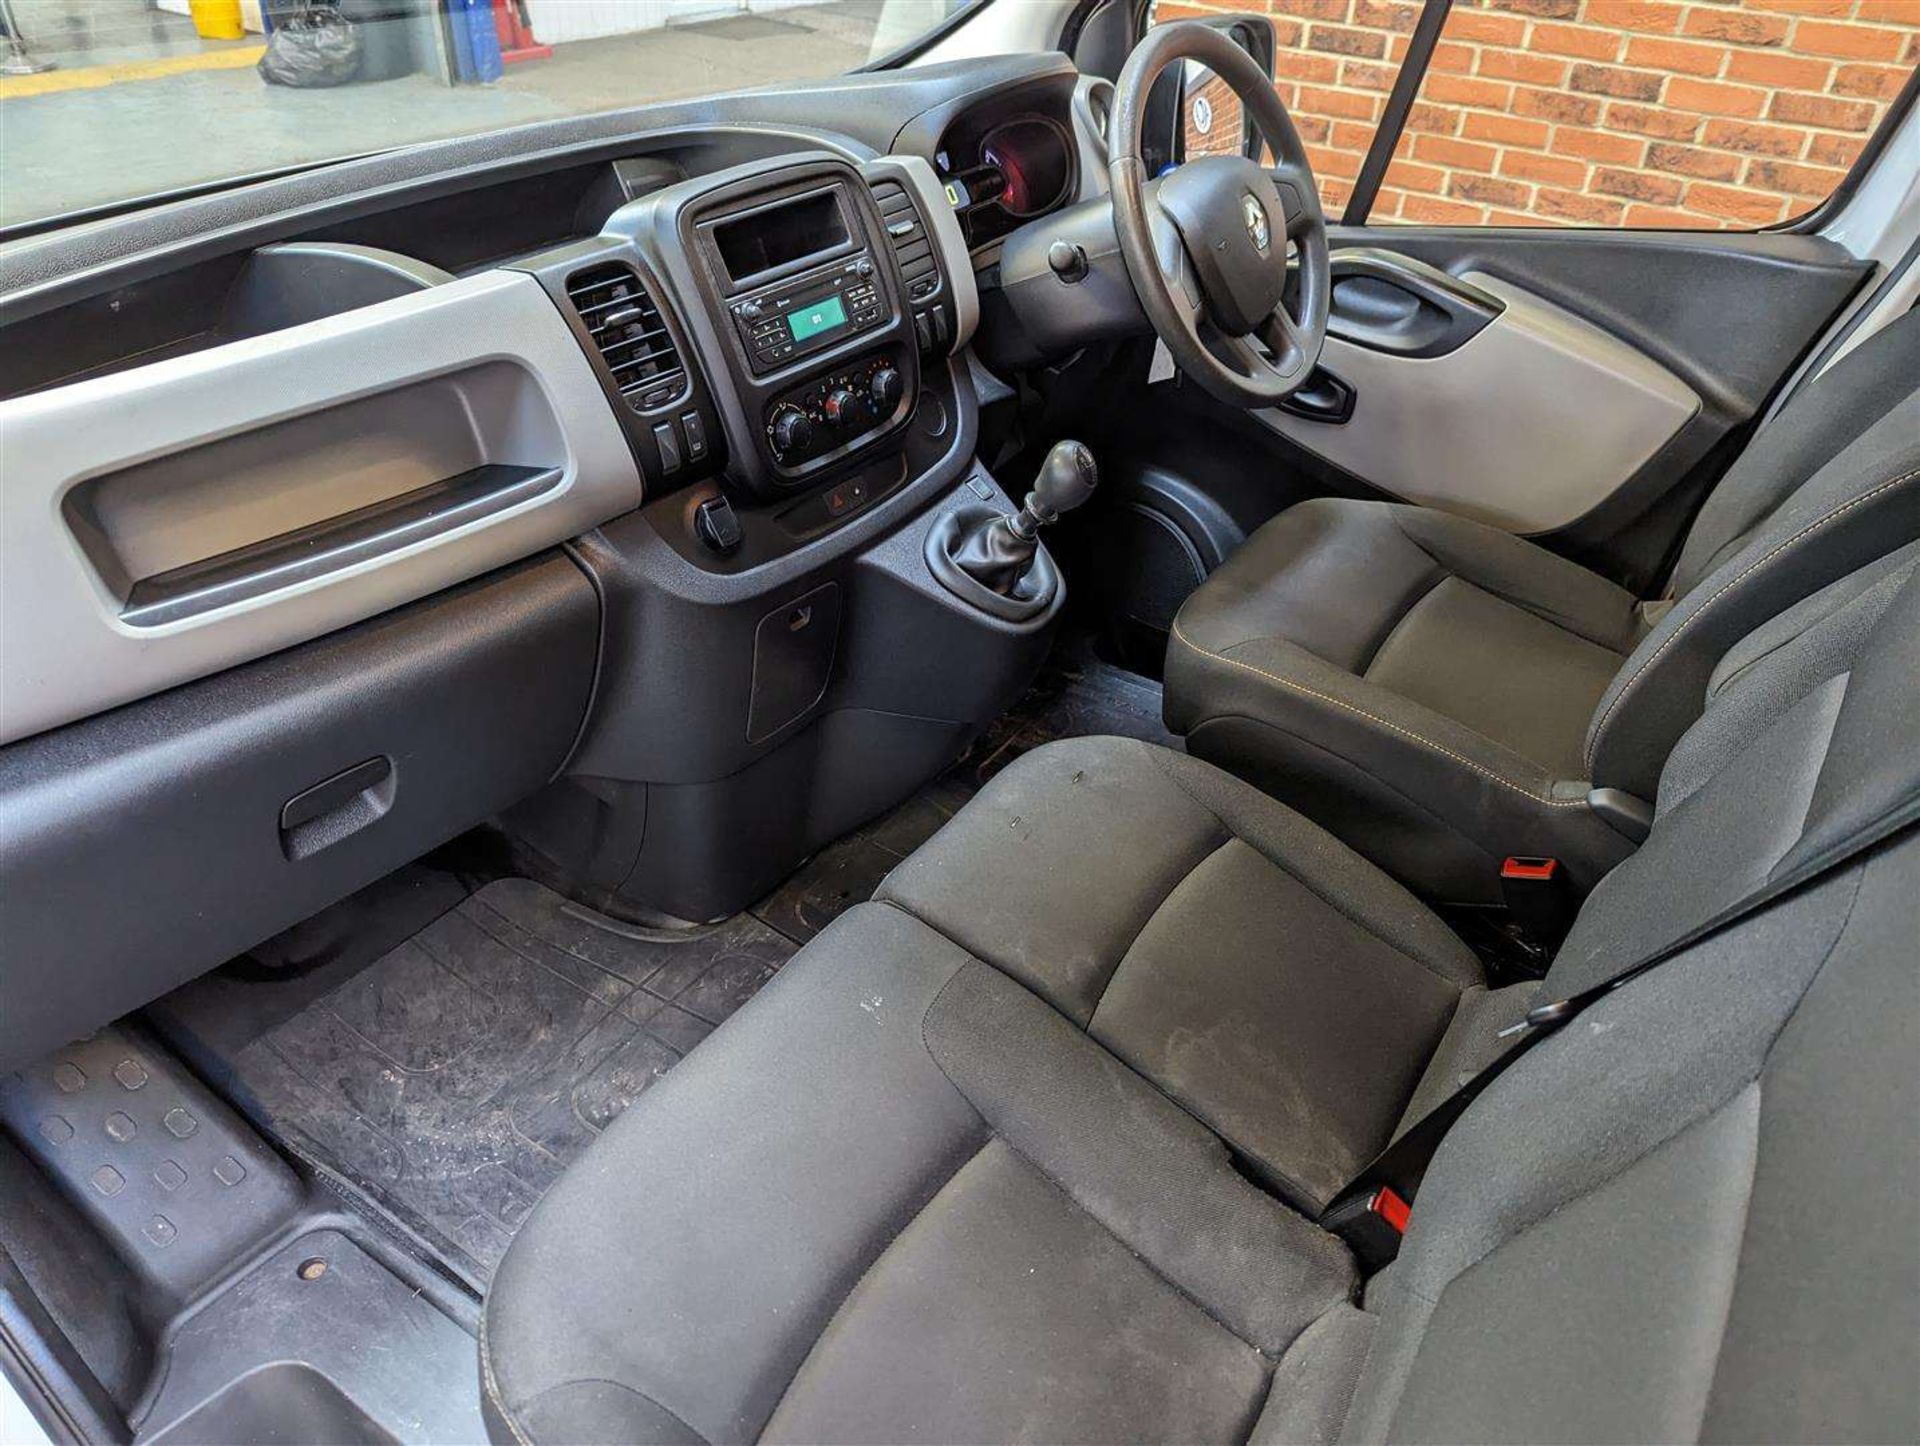 2019 RENAULT TRAFIC SL27 BUSINESS + DC - Image 11 of 27